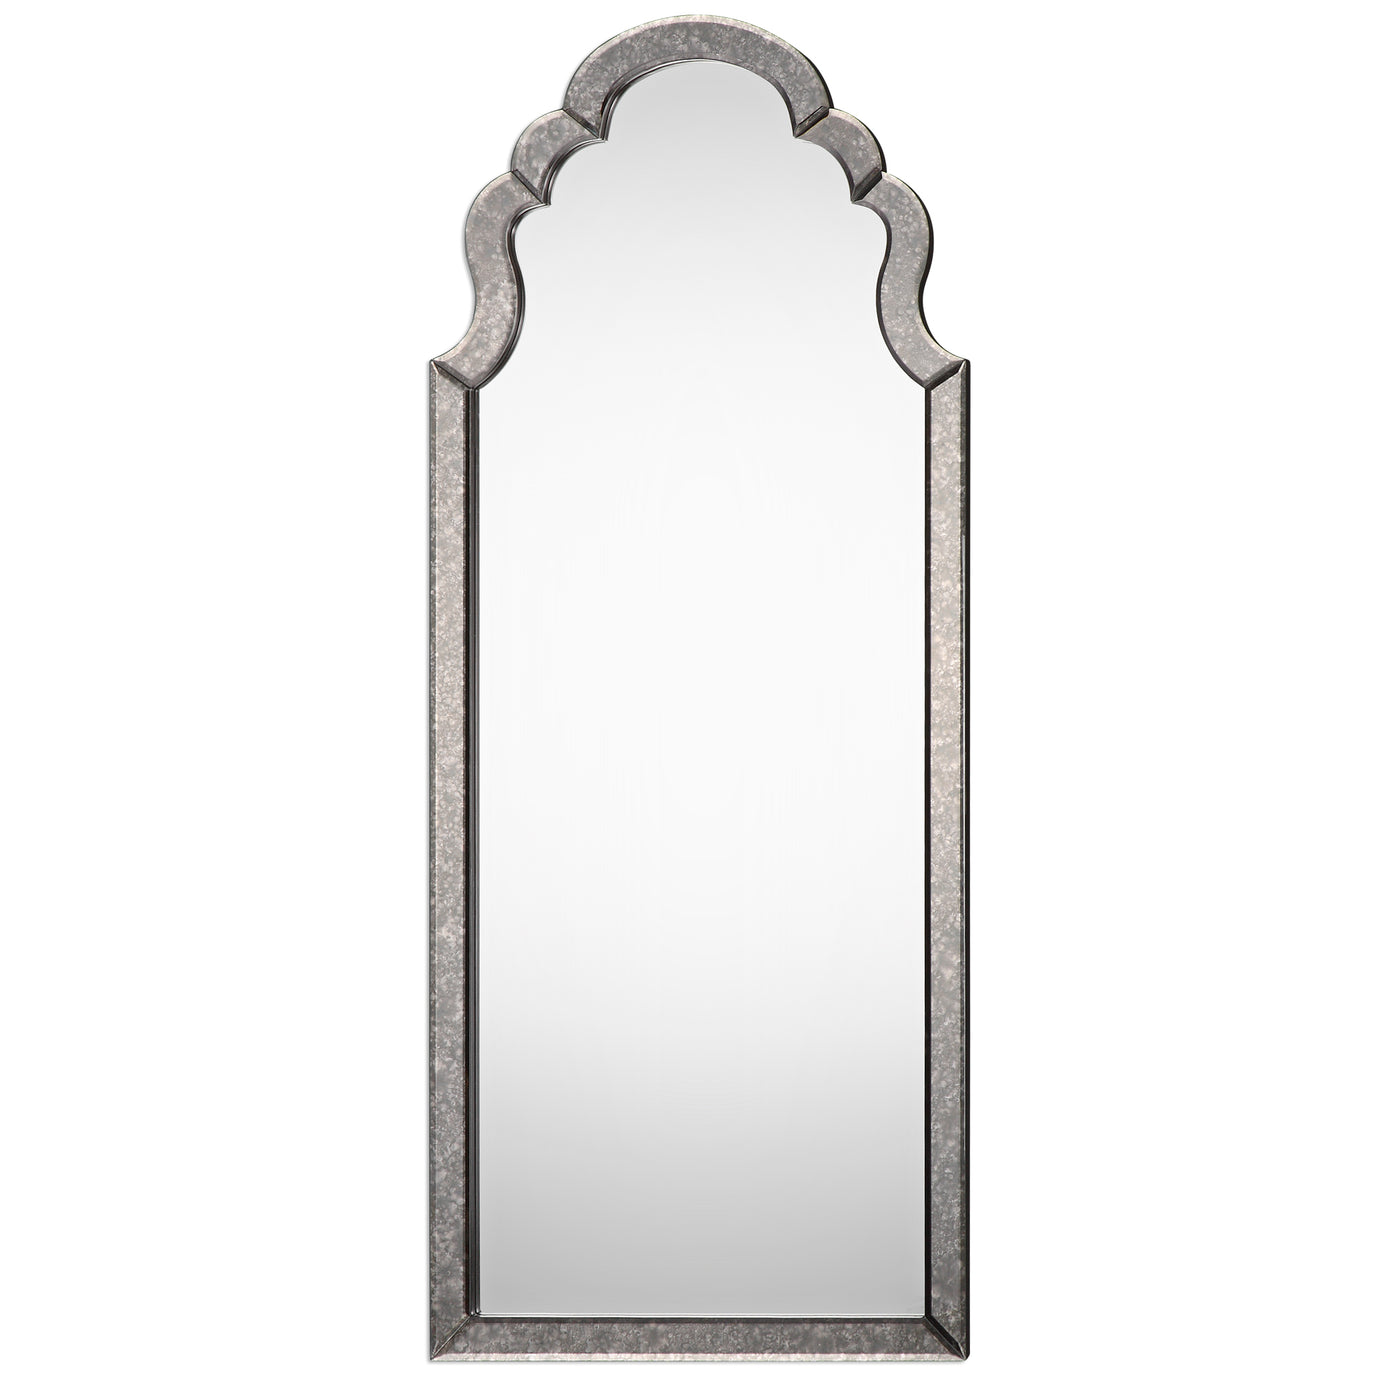 The Frame Is Adorned With Hand Beveled, Heavily Antiqued Mirrors.